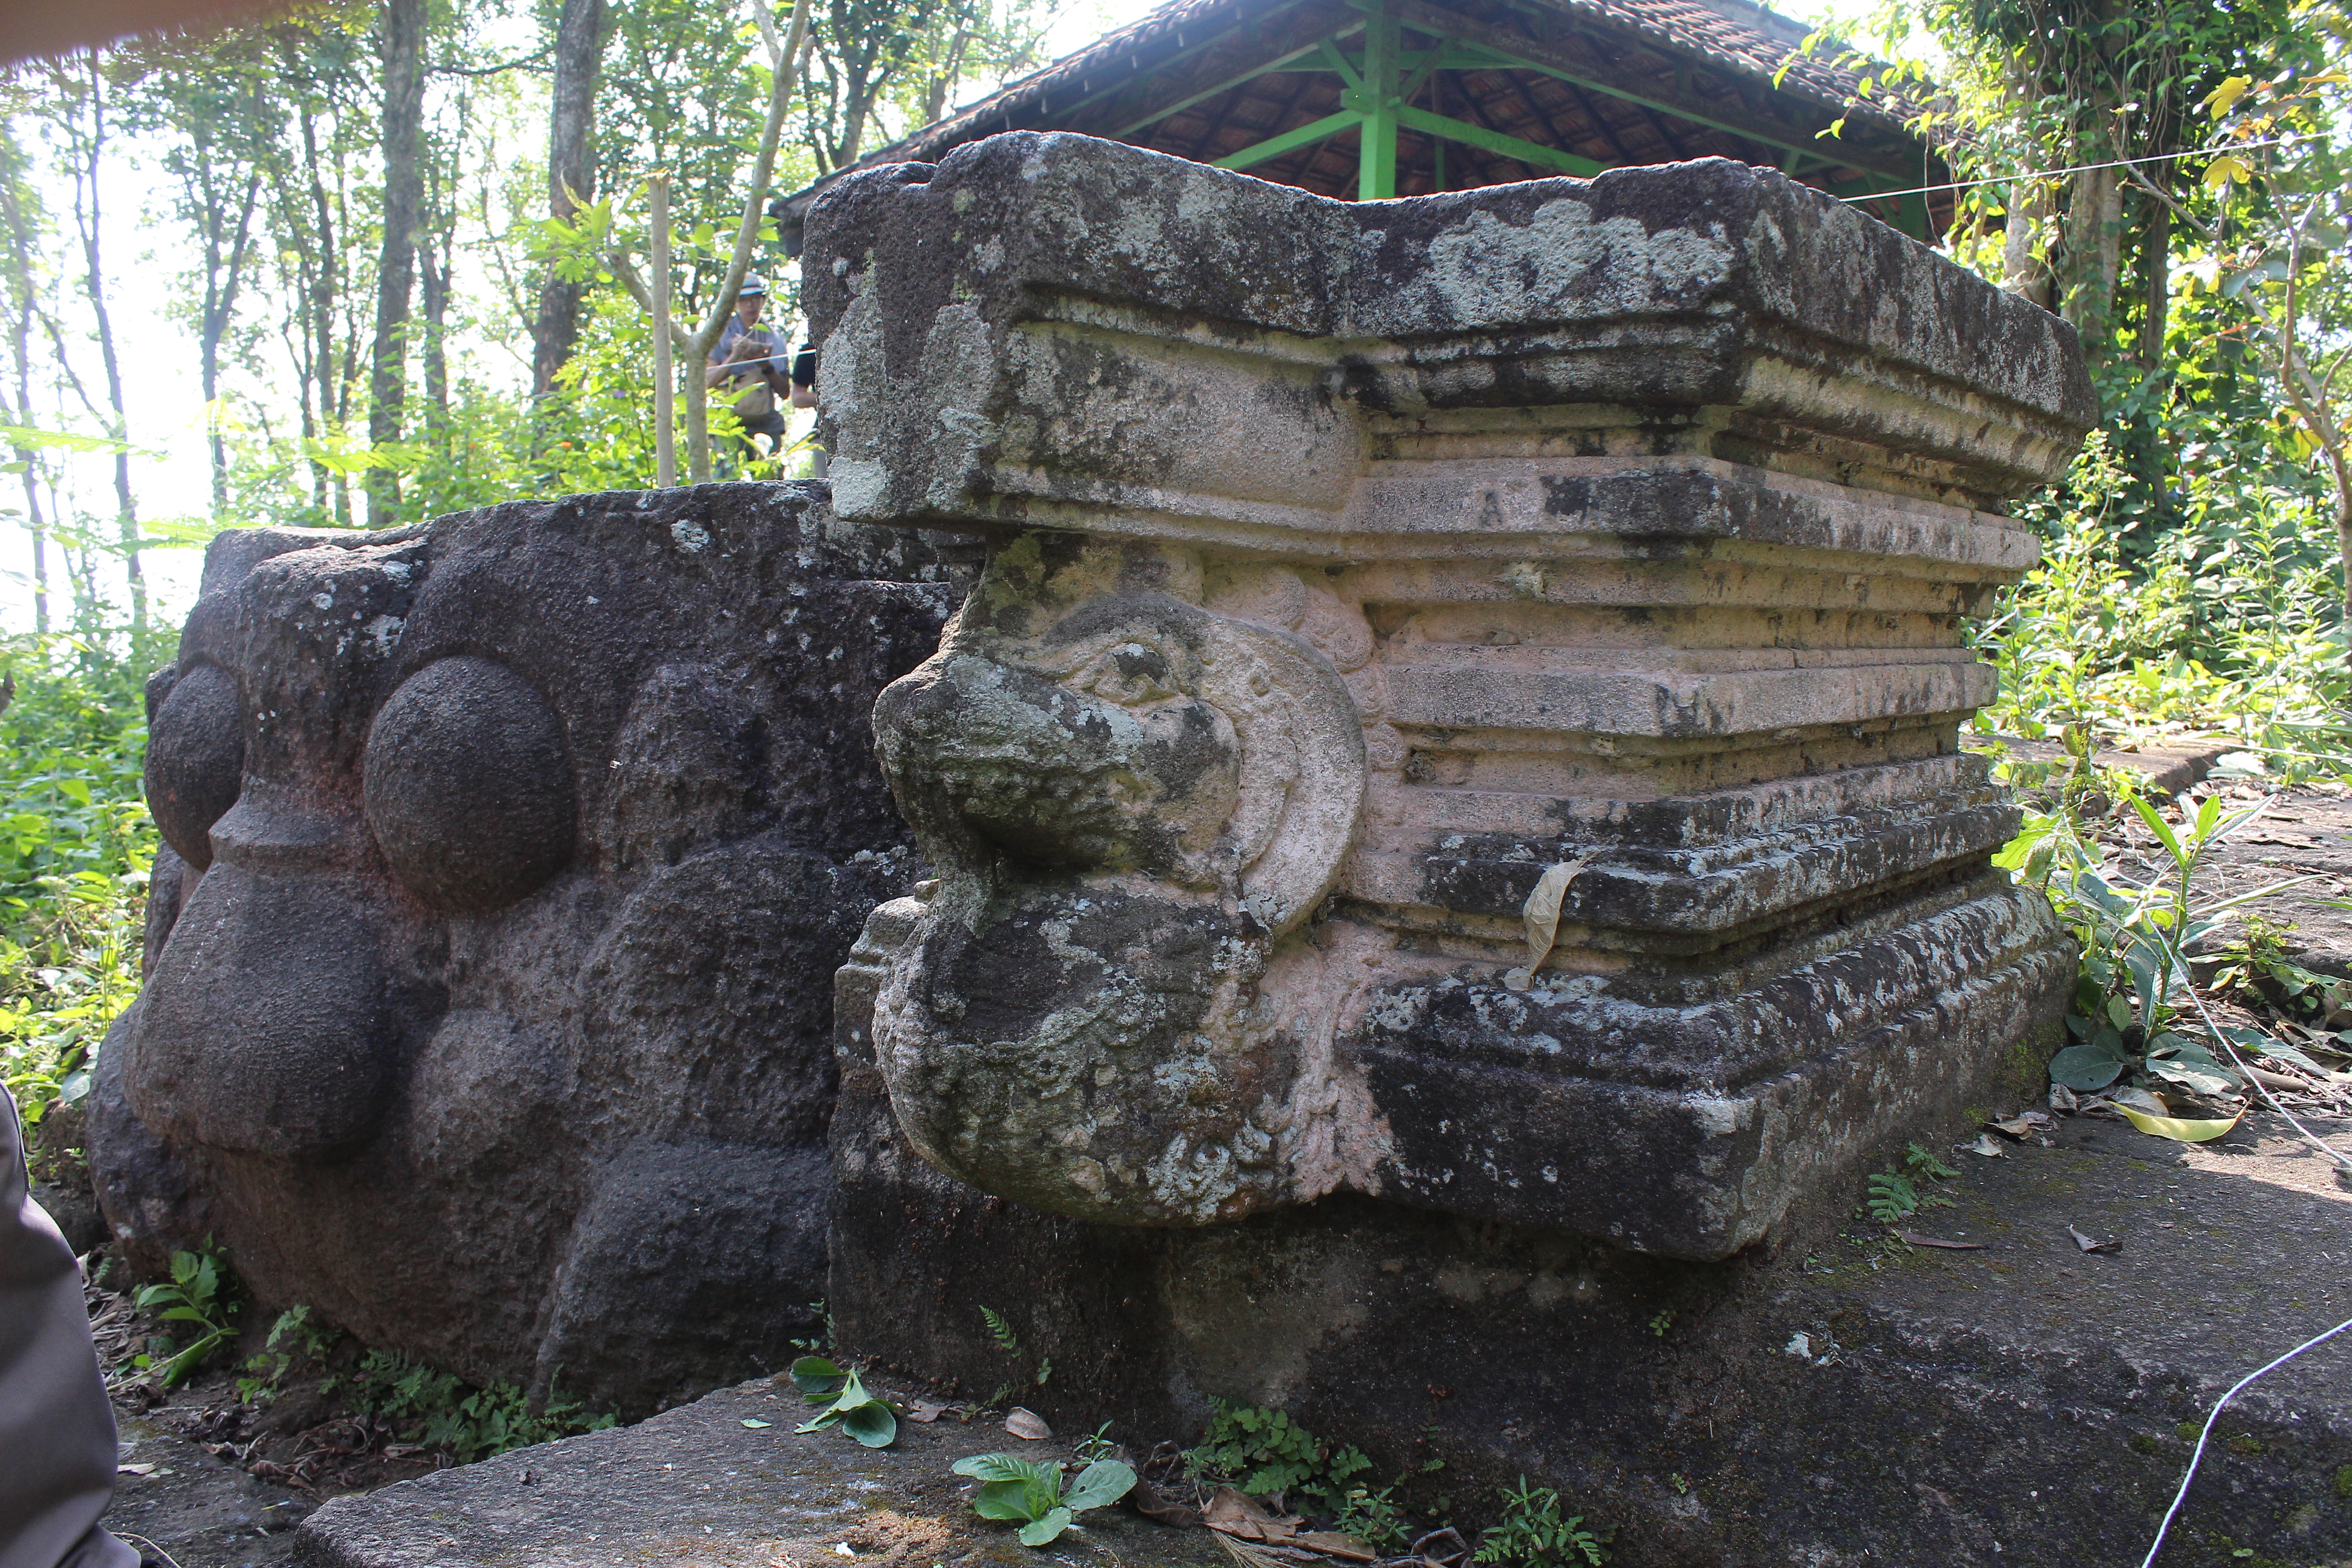 Granite pedestal with serpent supporting the spout